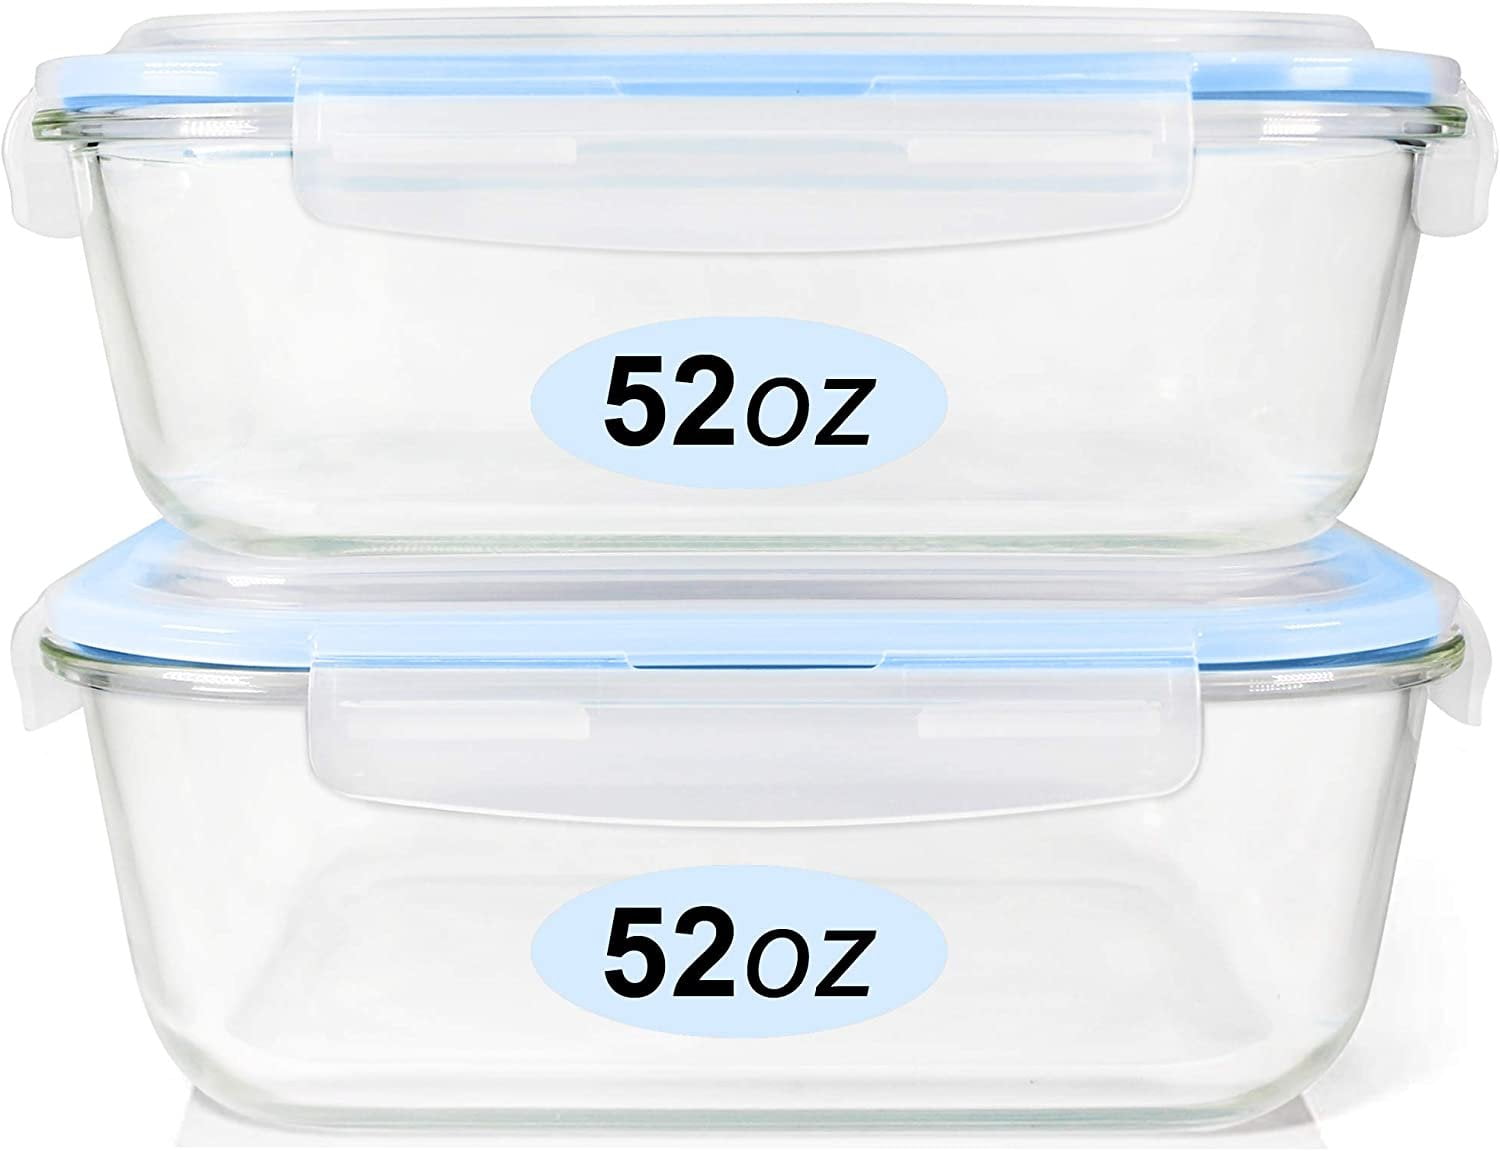  Skroam 5-Packs 36OZ Glass Airtight Food Storage Containers 3  Compartments, Glass Meal Prep Container Set with Lids for Pantry Kitchen  Organizers and Storage, BPA Free Glass Lunch Boxes Bento: Home 